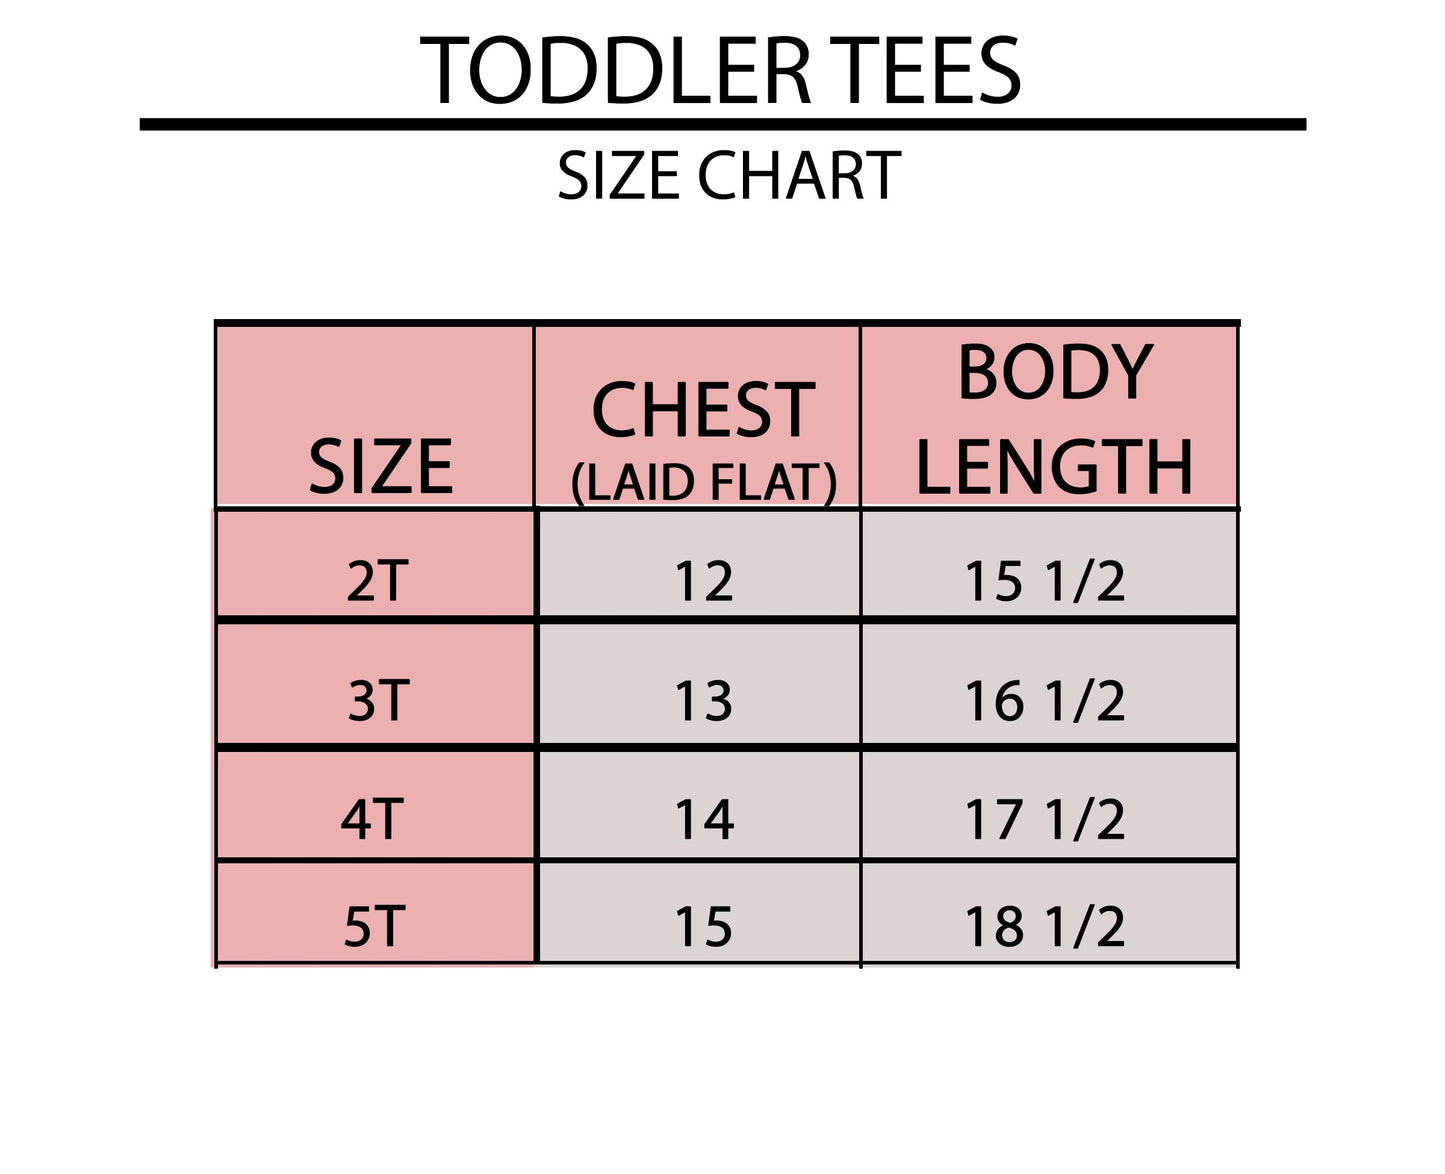 Today Is Your Day Bold Smile | Toddler Short Sleeve Crew Neck